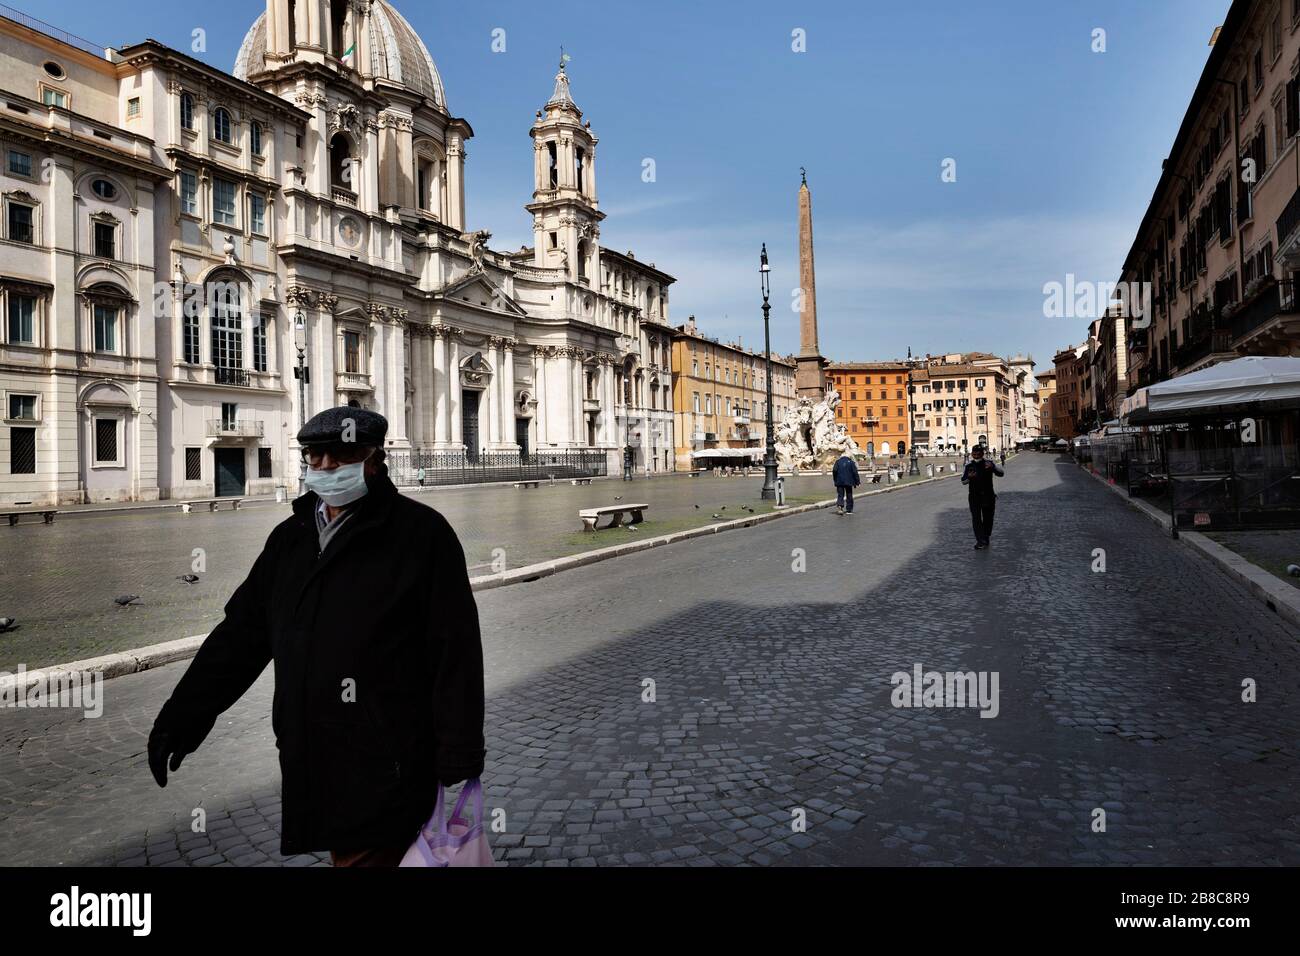 Roma, Roma, Italy. 21st Mar, 2020. Coran Virus, COD-19, emergency in the streets of Roma.The Italian Government has adopted the measure of a national lockout by closing all activities, except for essential services in an attempt to fight Coronavirus (COVID-19) .All the city, as all the whole country, is under quarantine and the movement are restricted to the necessary. The streets of the city are empty and controled by the amry. Credit: Matteo Trevisan/ZUMA Wire/Alamy Live News Stock Photo